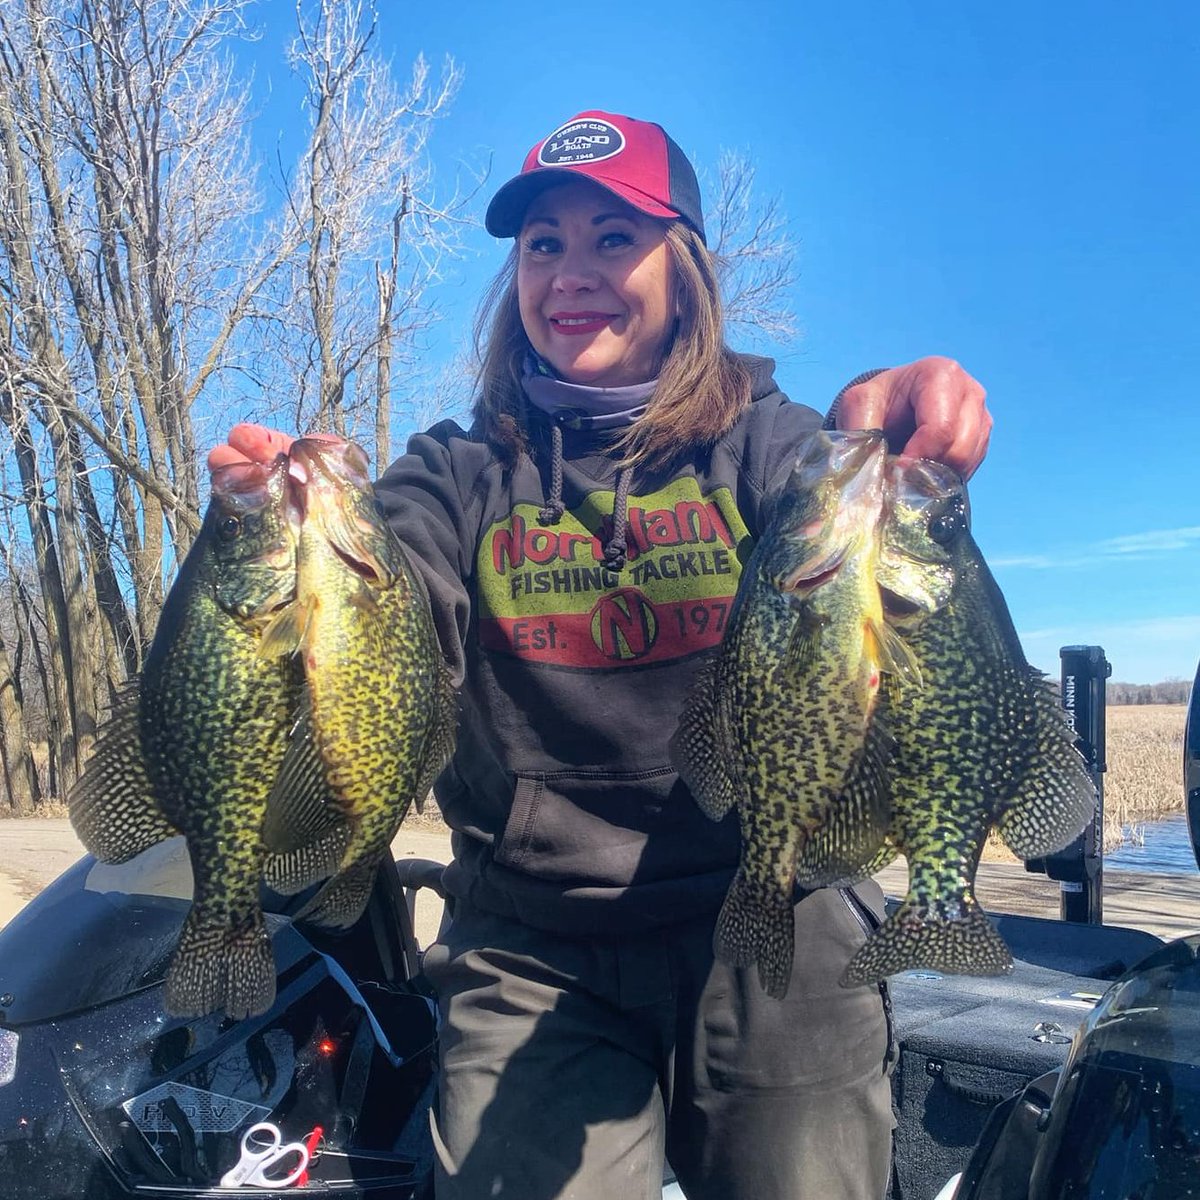 Crappie Season! Who's chasing some pre spawn crappies this spring? 👌🎣 #TeamNorthlandTackle